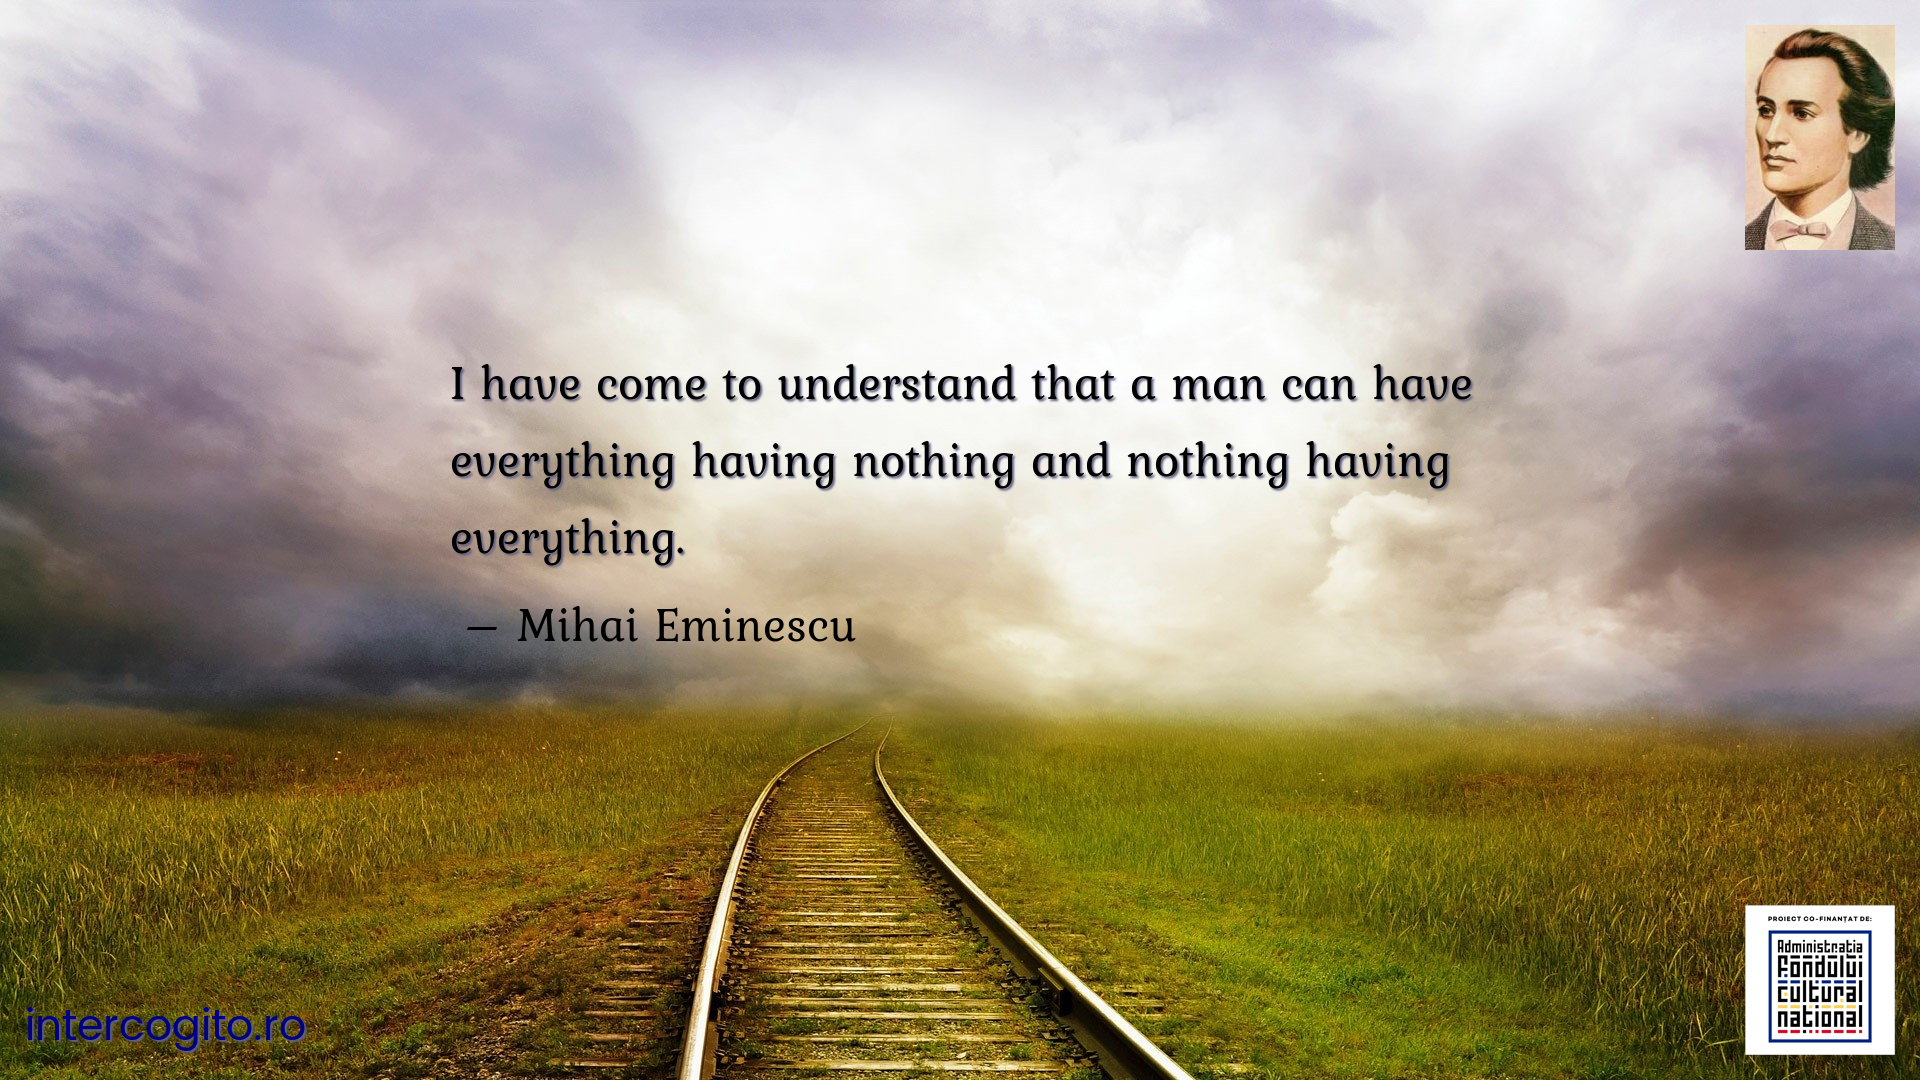 I have come to understand that a man can have everything having nothing and nothing having everything.